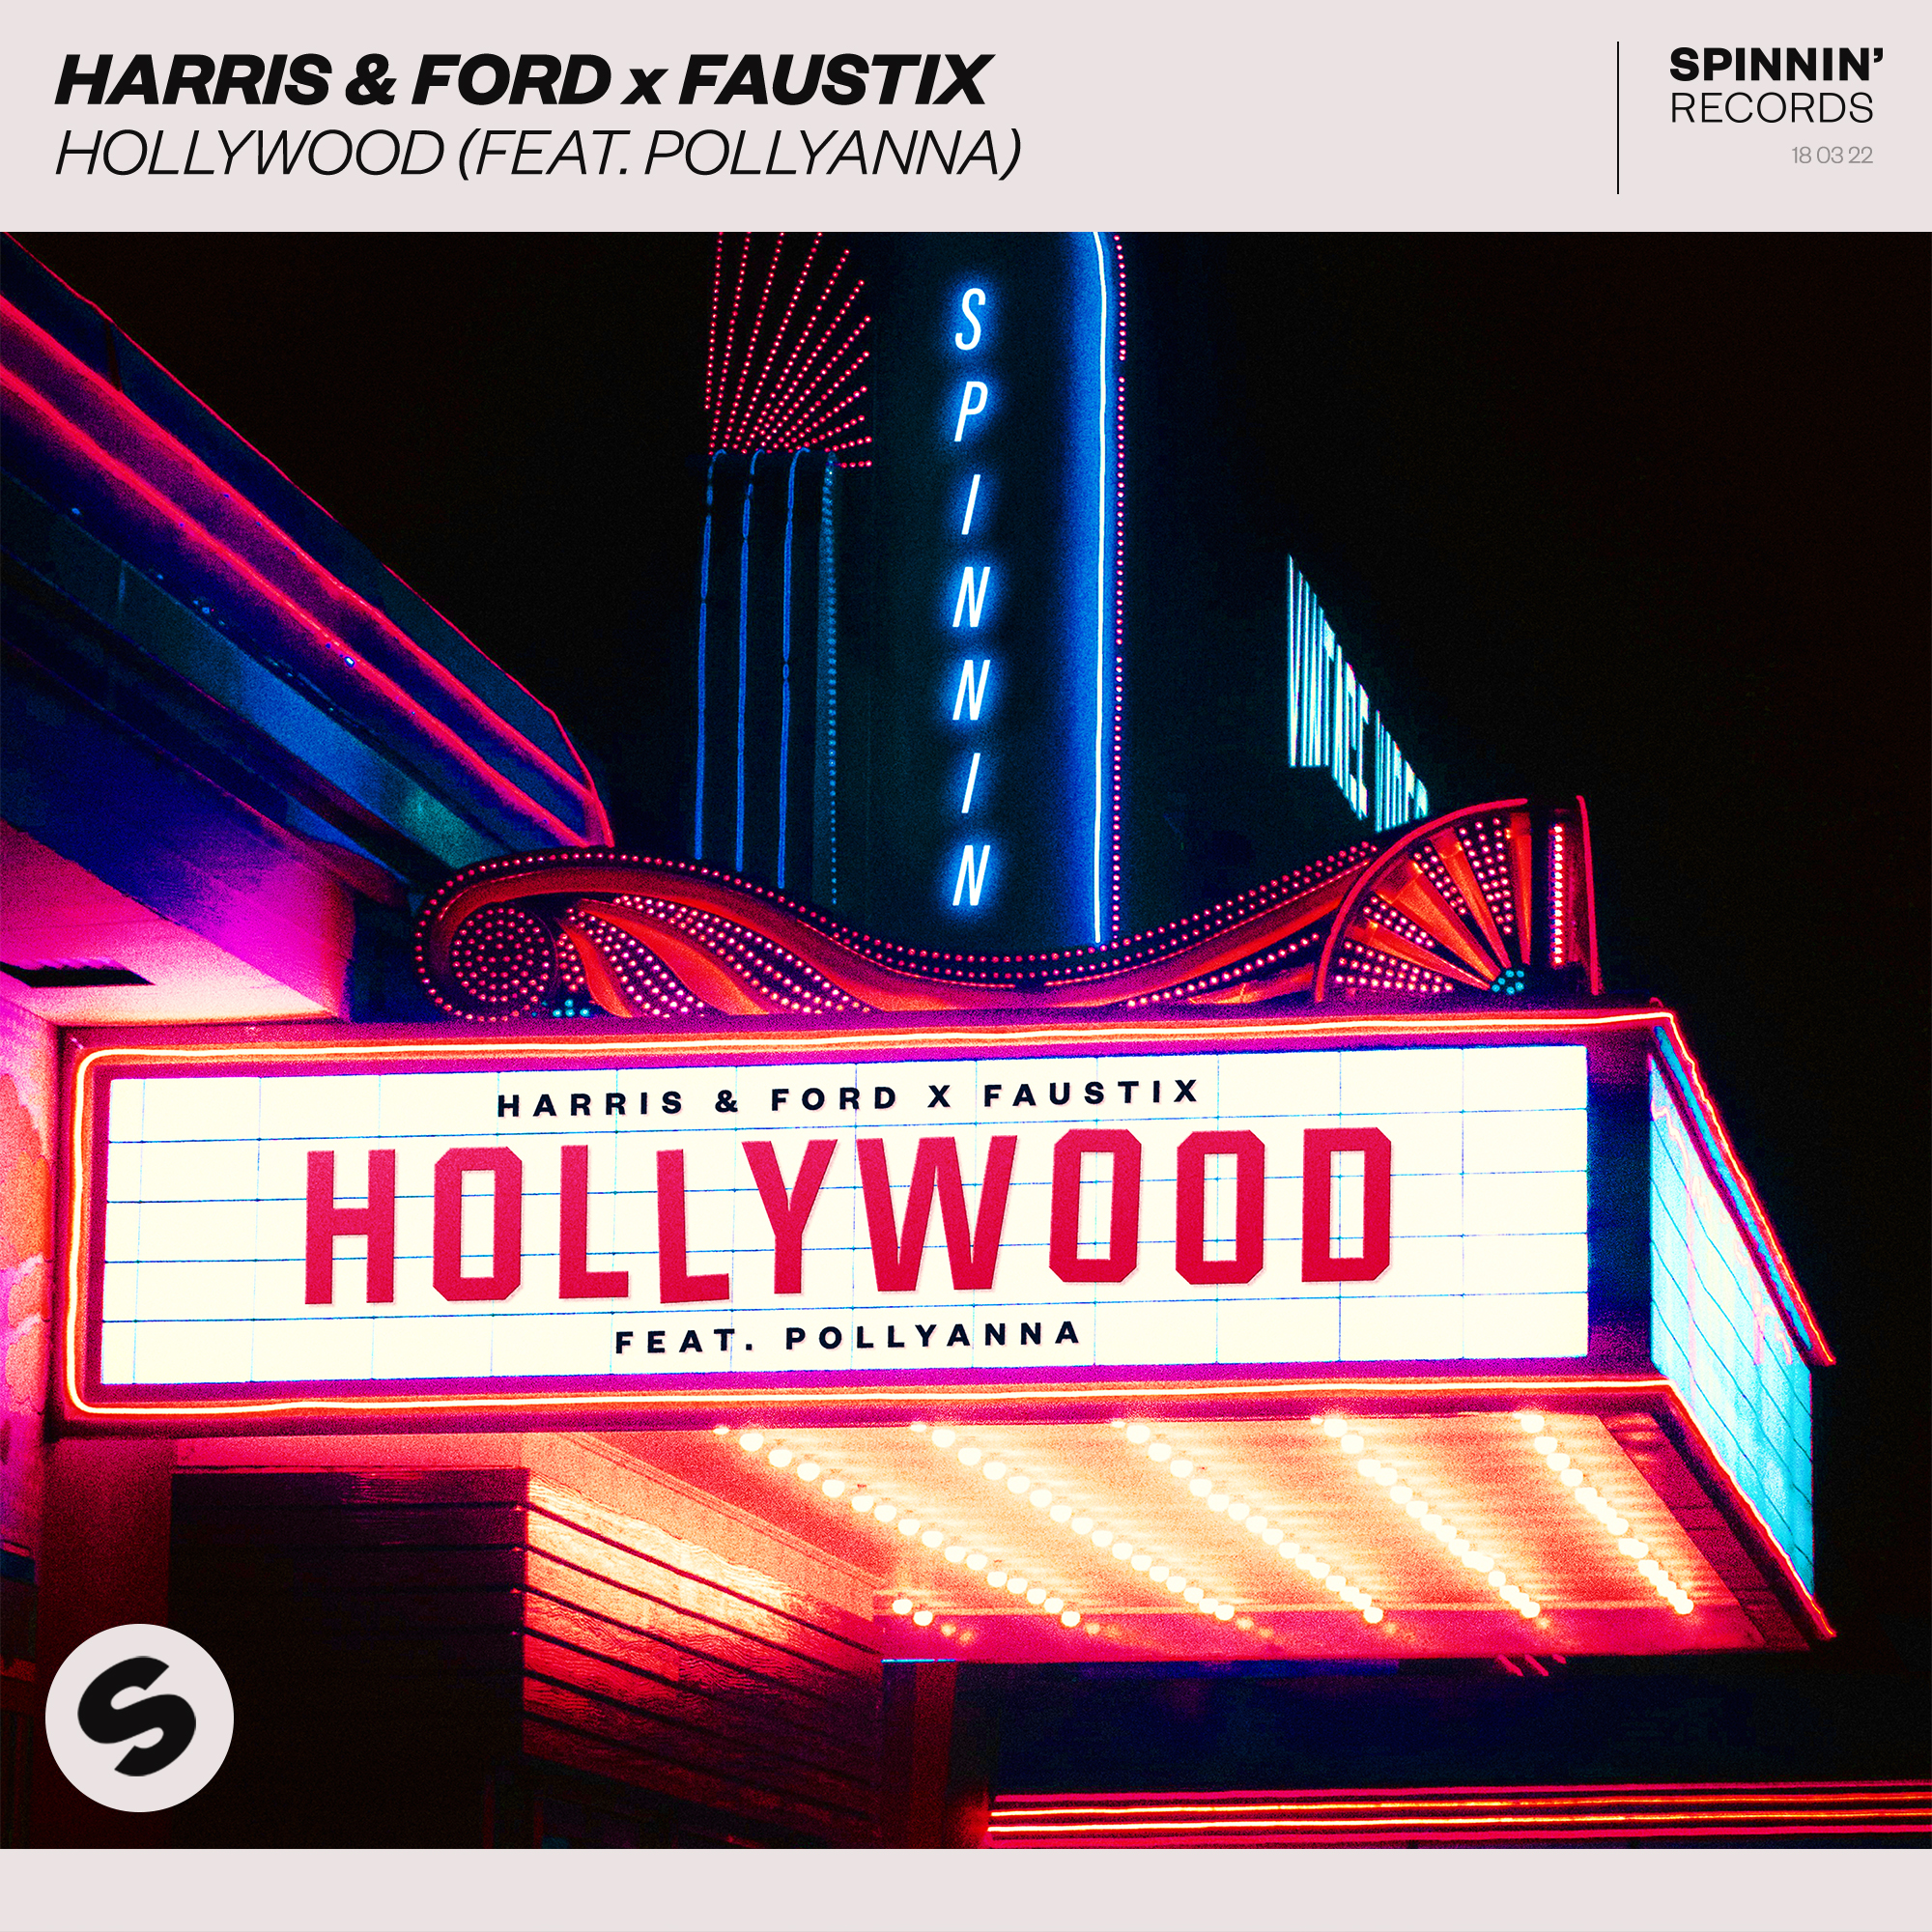 Harris &amp; Ford & Faustix featuring PollyAnna — Hollywood cover artwork